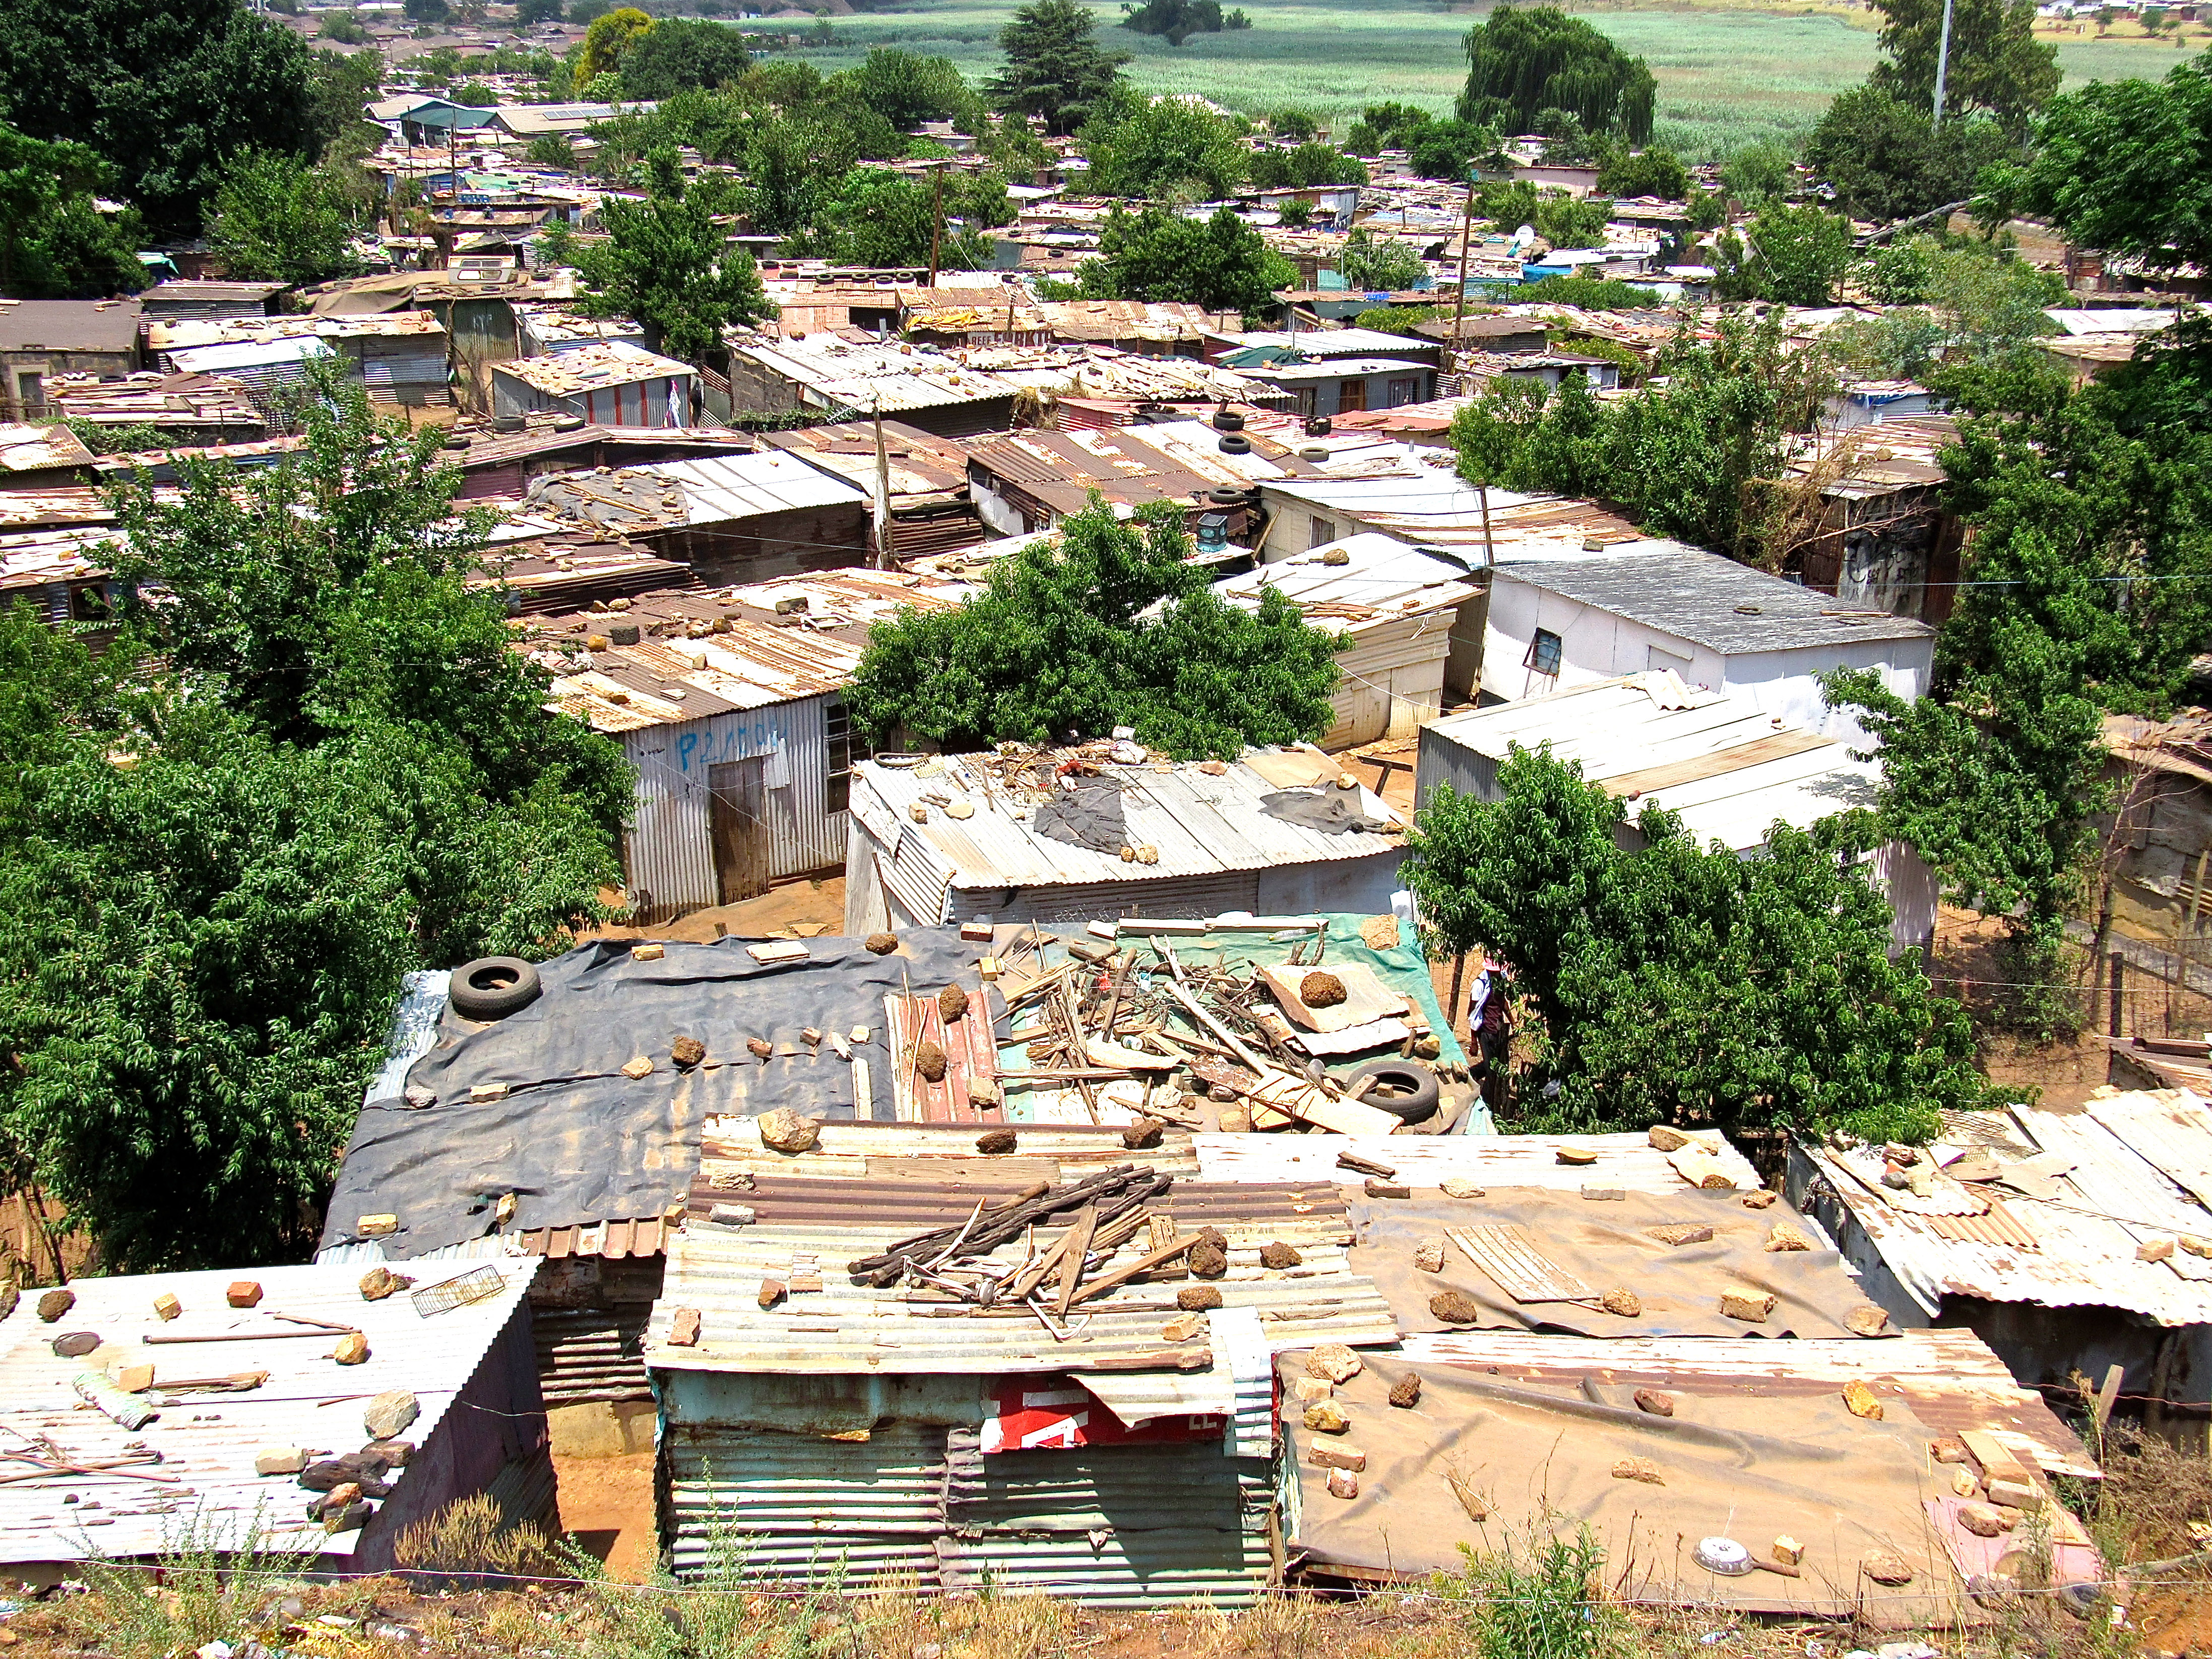 Original Township Environment of Old Soweto